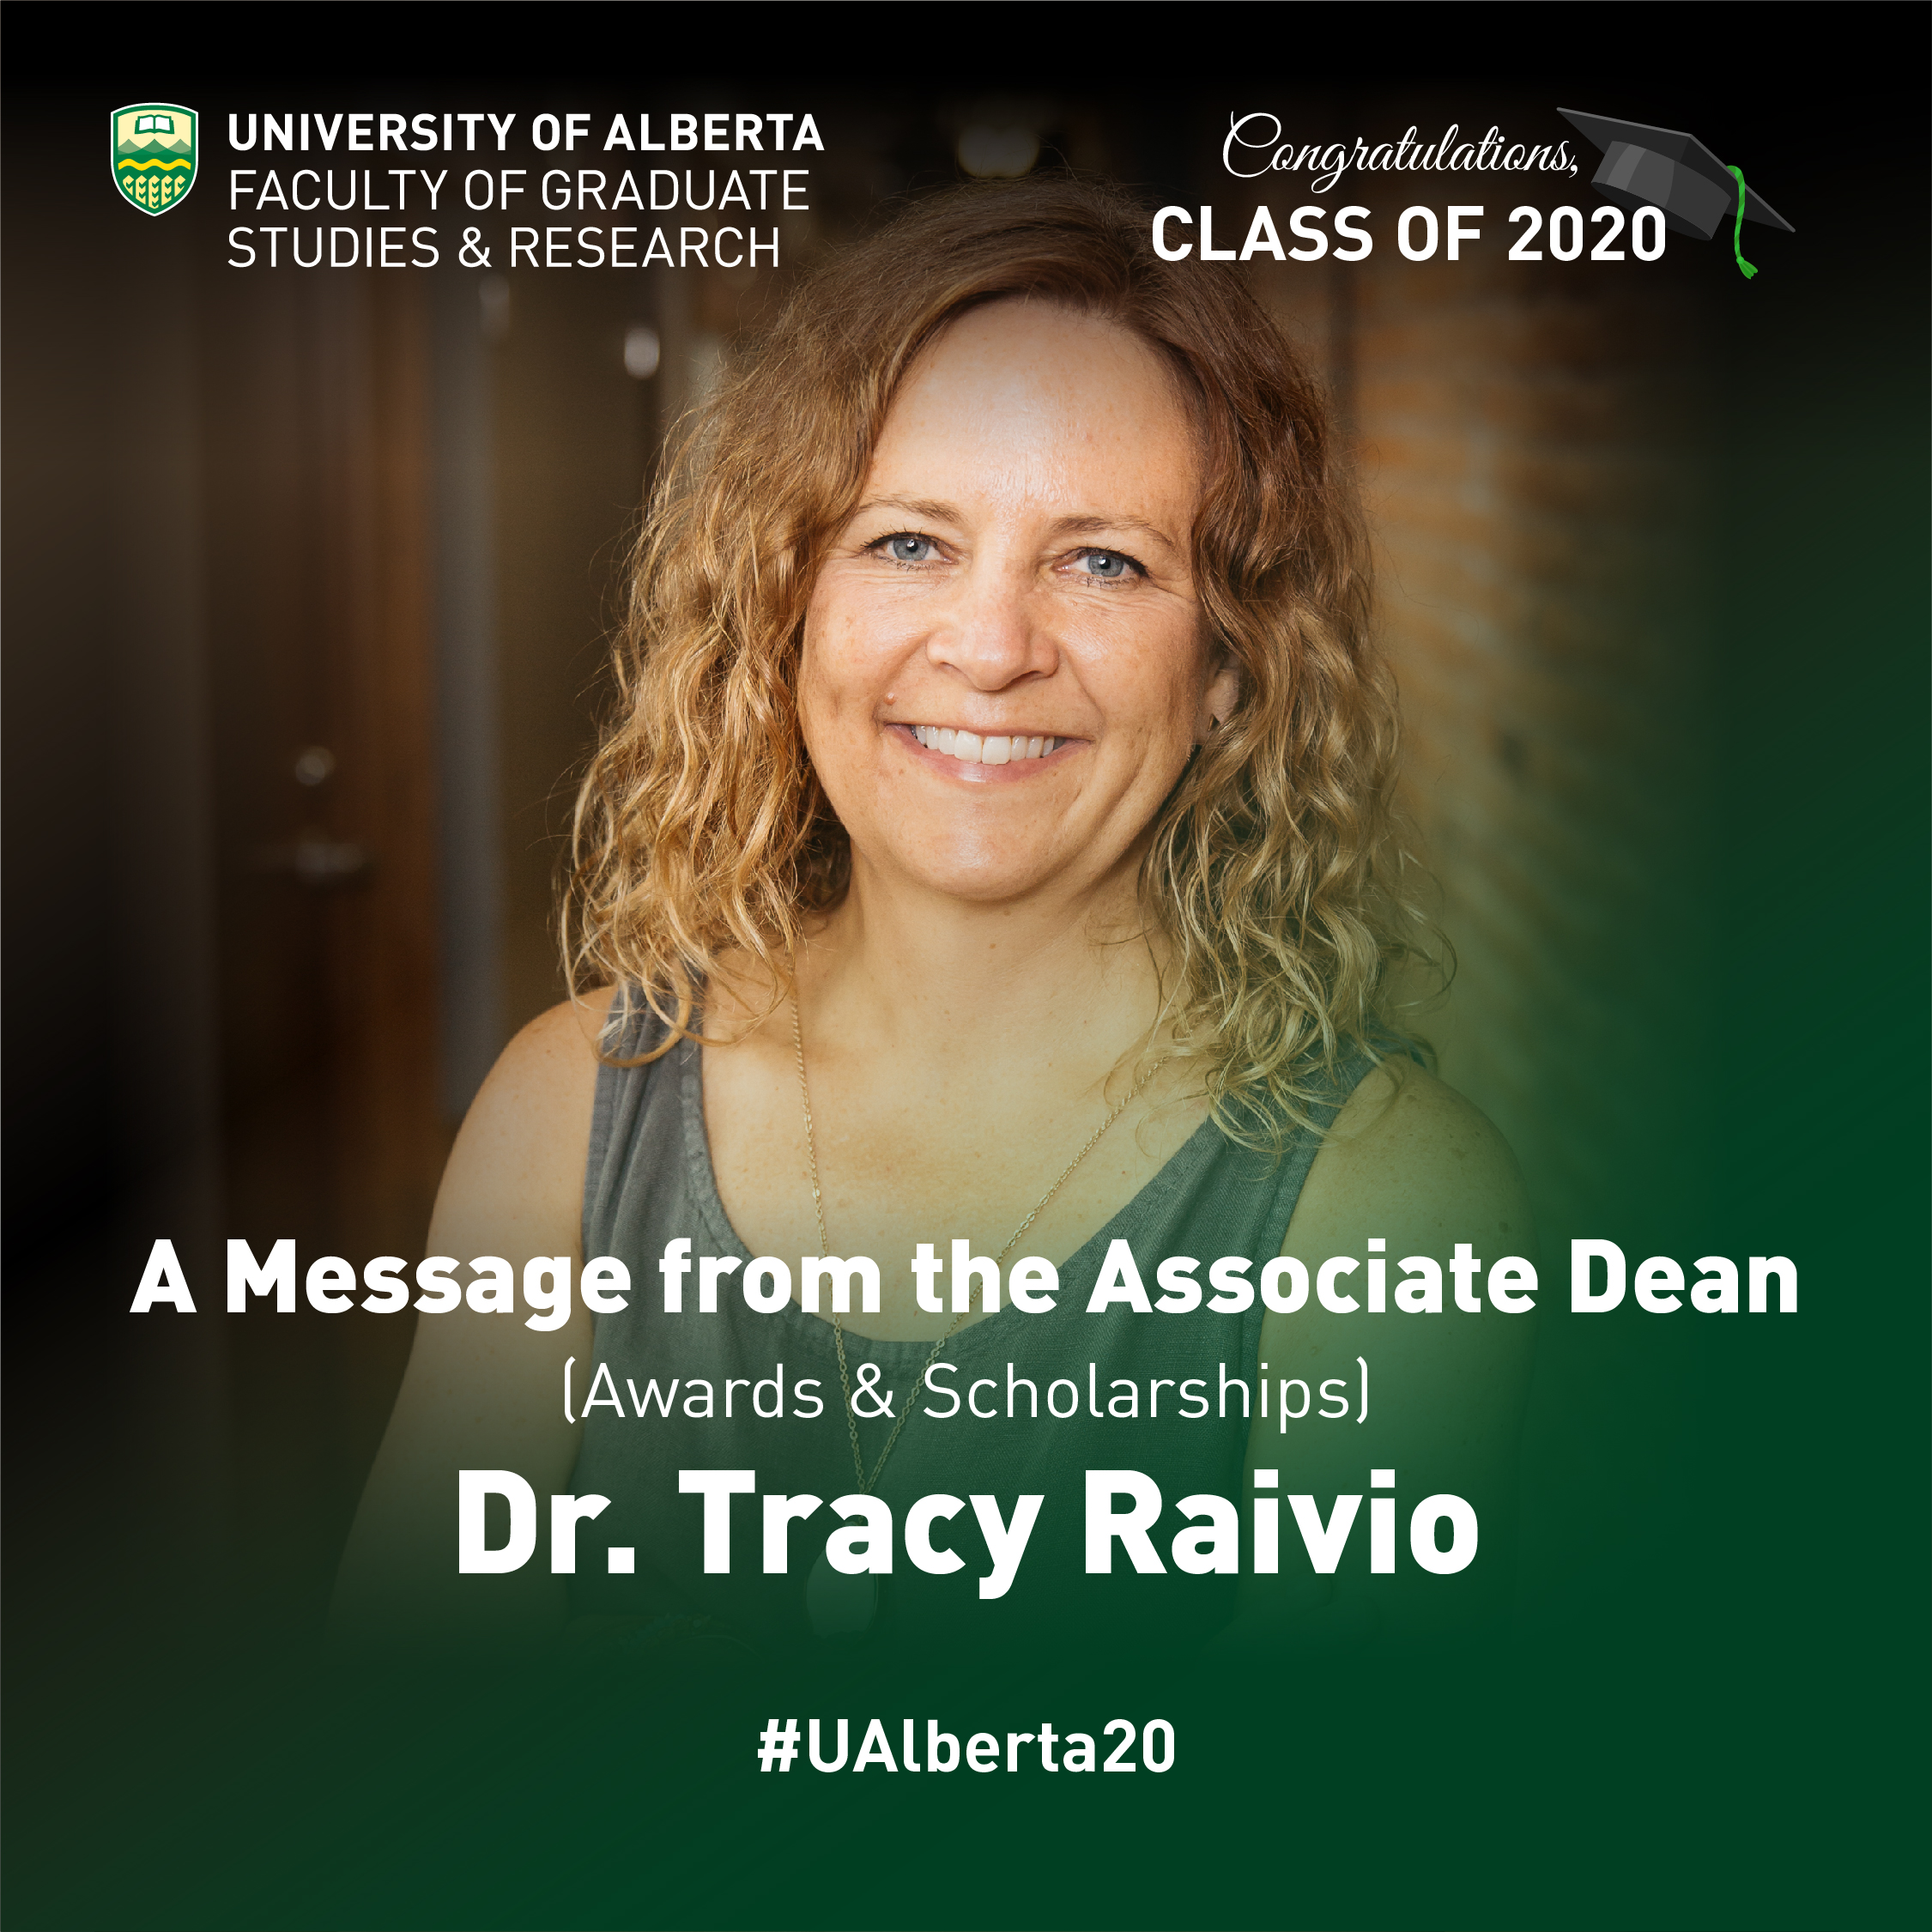 A Message from Dr. Tracy Raivio, FGSR Associate Dean (Awards & Scholarships)